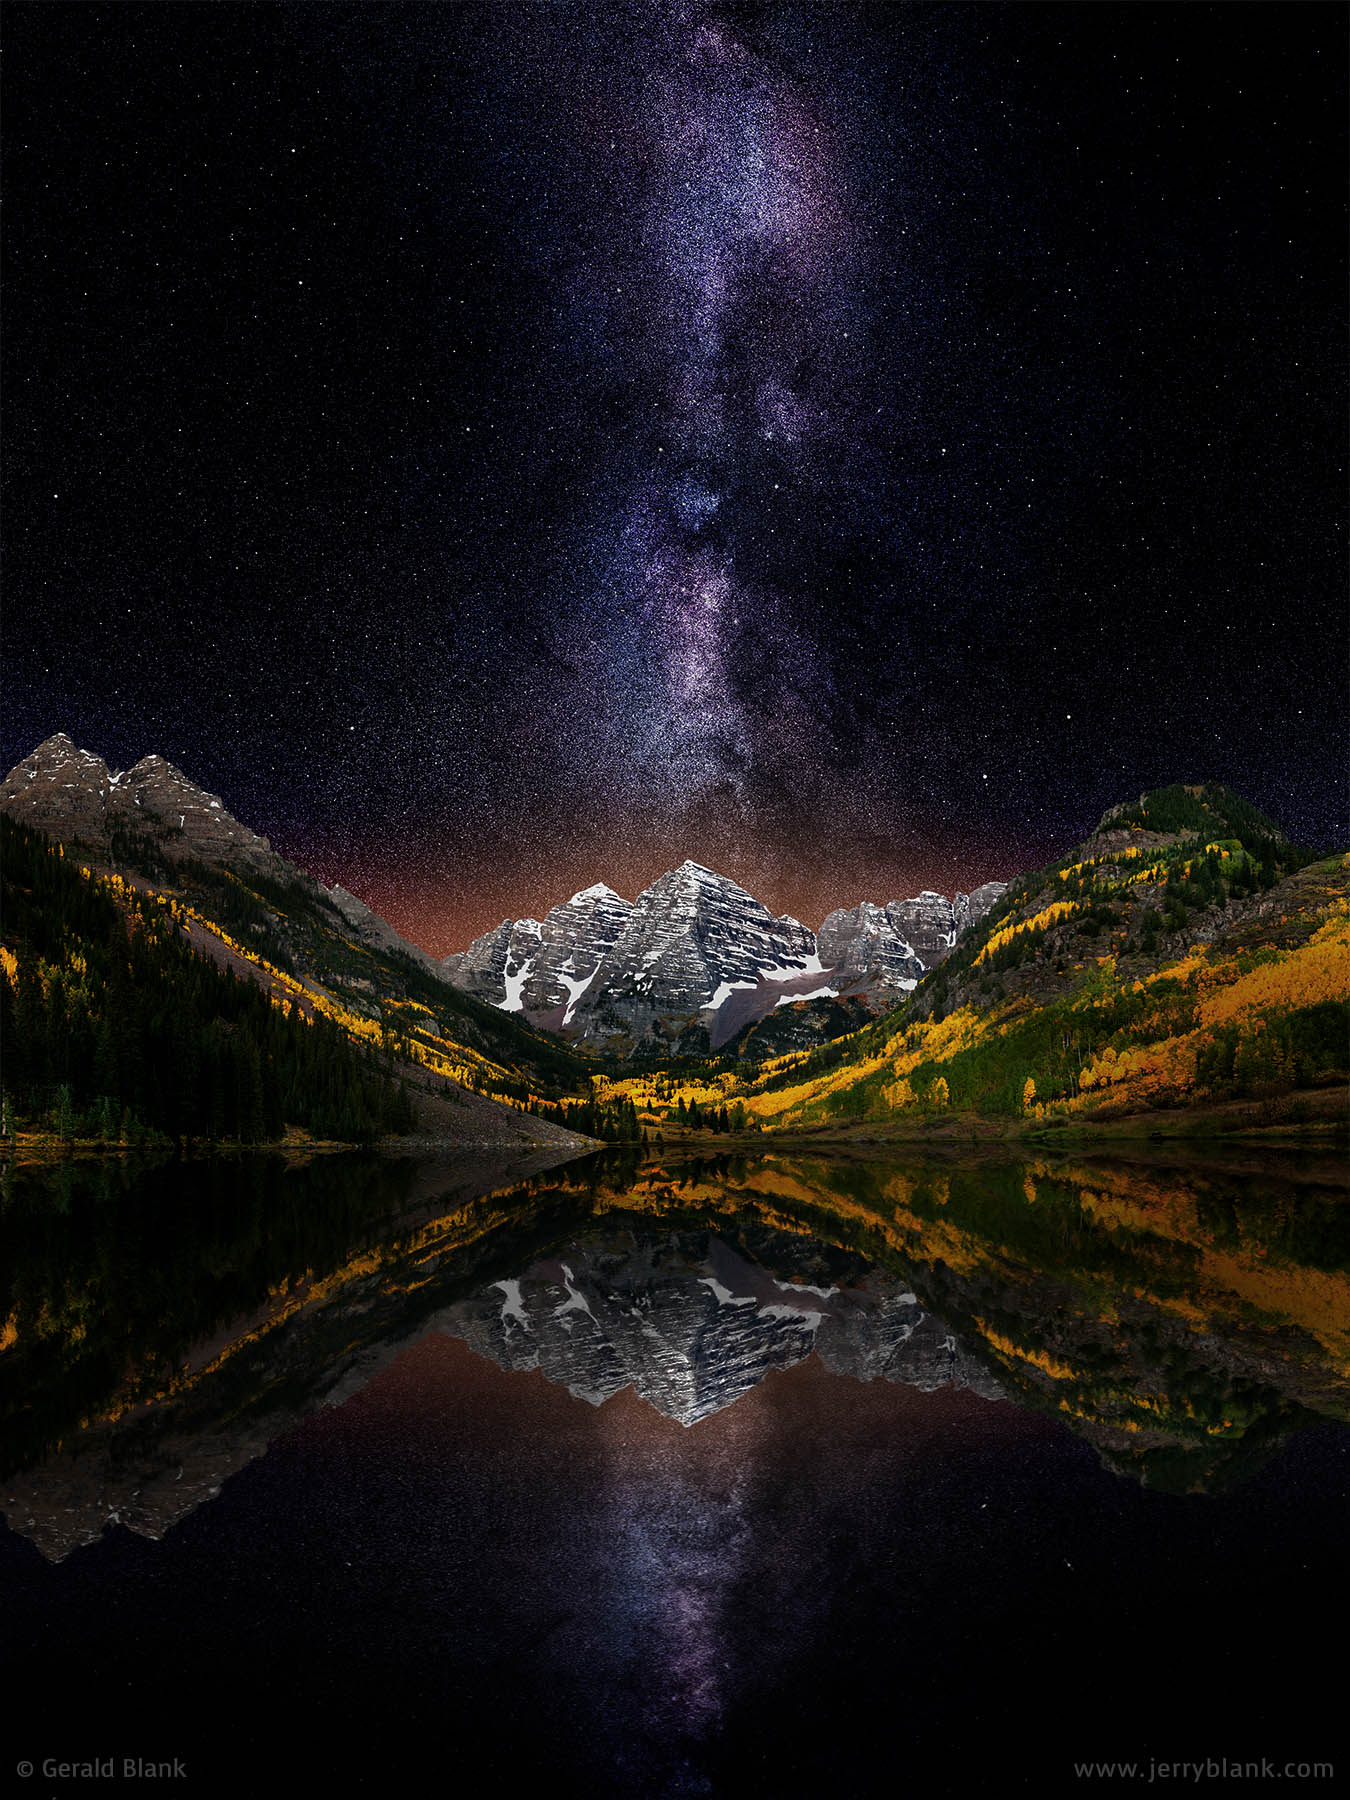 #40560 - A starry night view of the Maroon Bells in autumn, reflected in Maroon Lake in Colorado - photo by Jerry Blank